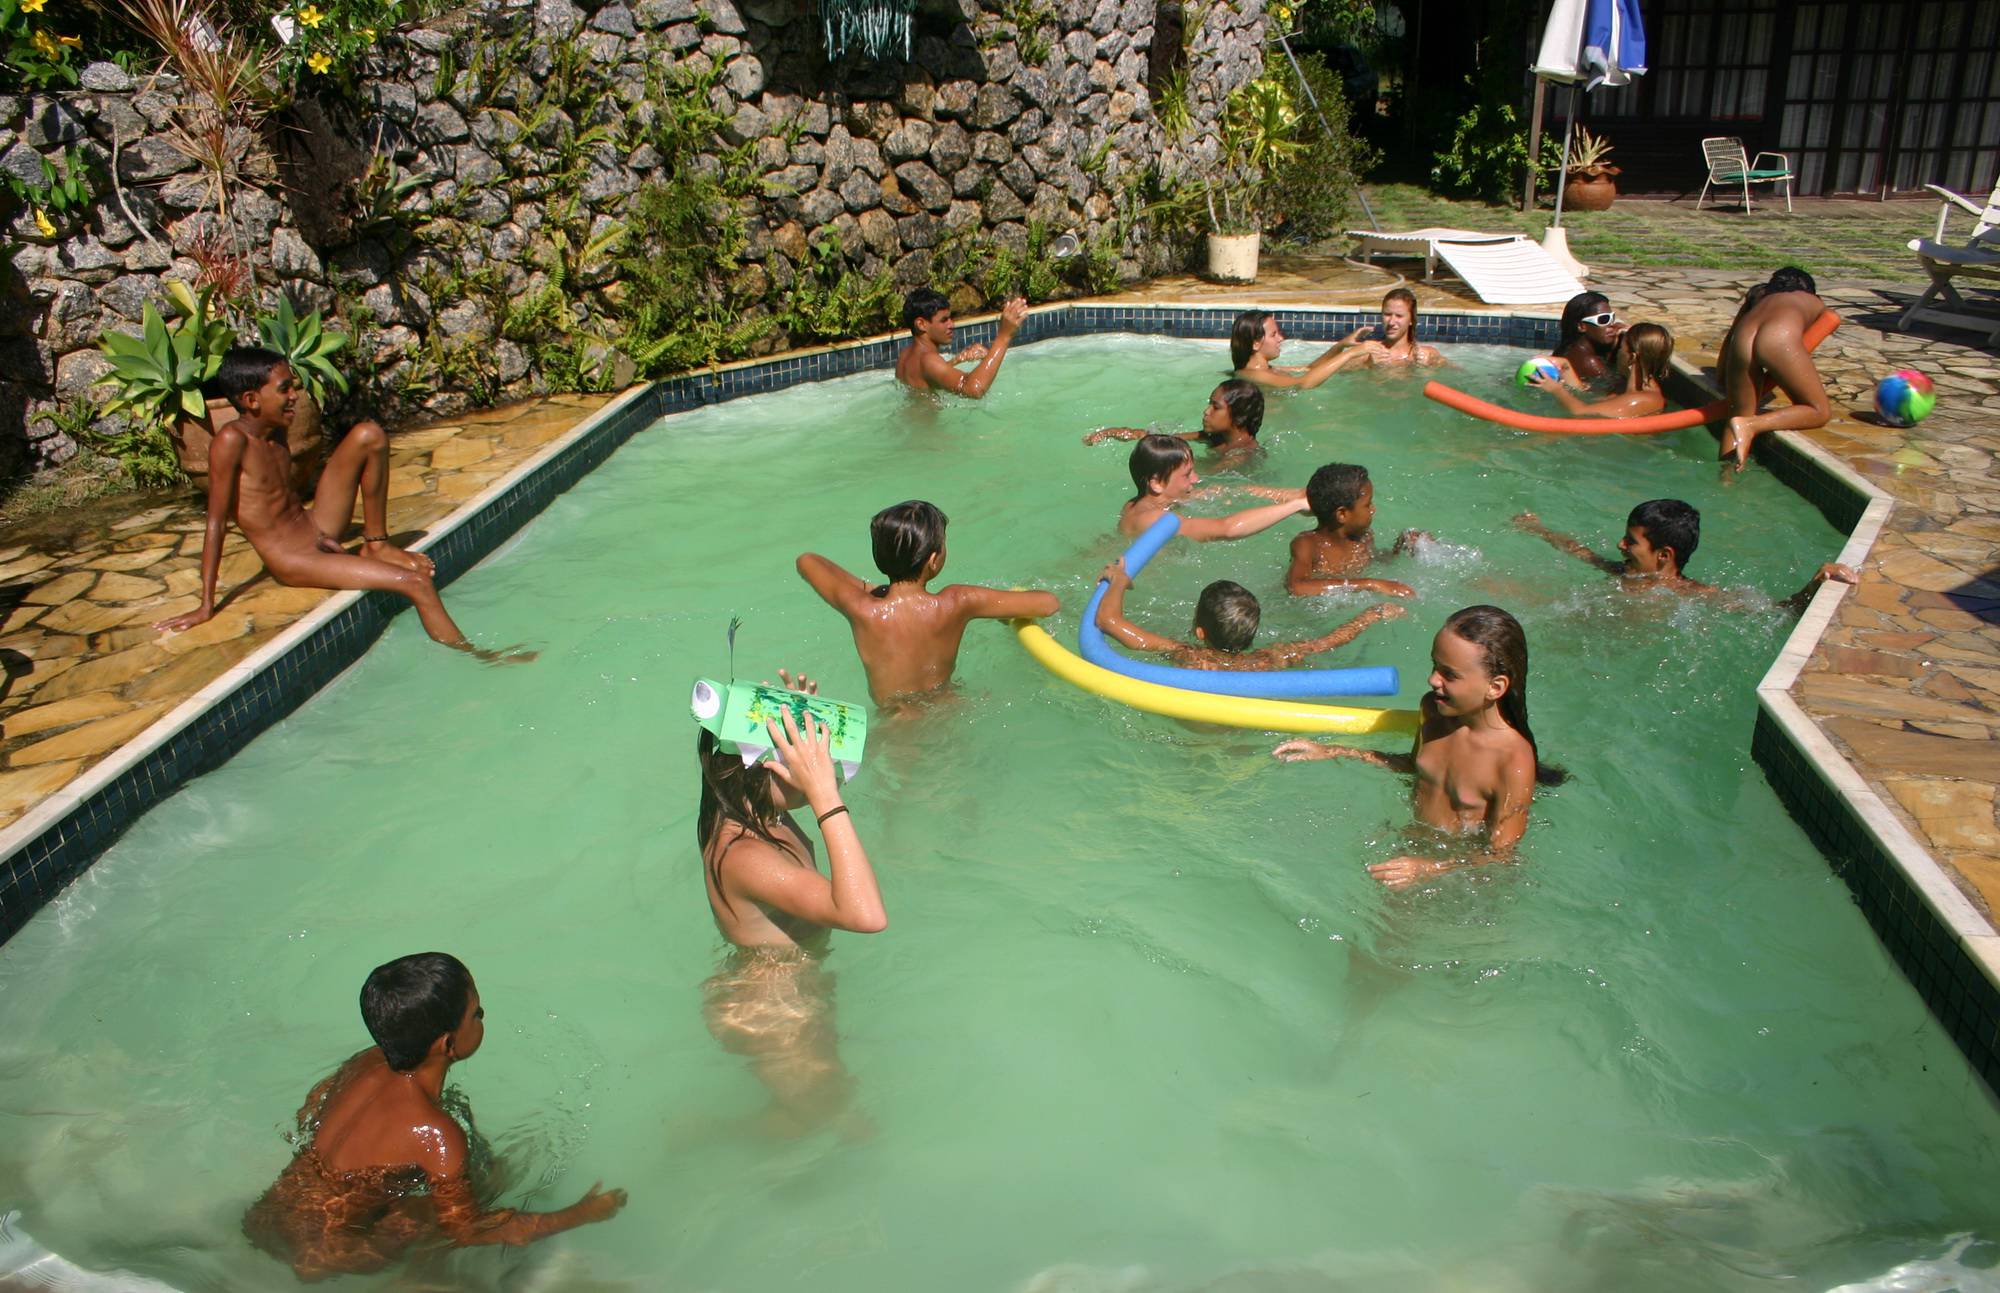 Purenudism Images-Brazilian Our Outdoor Pool - 3